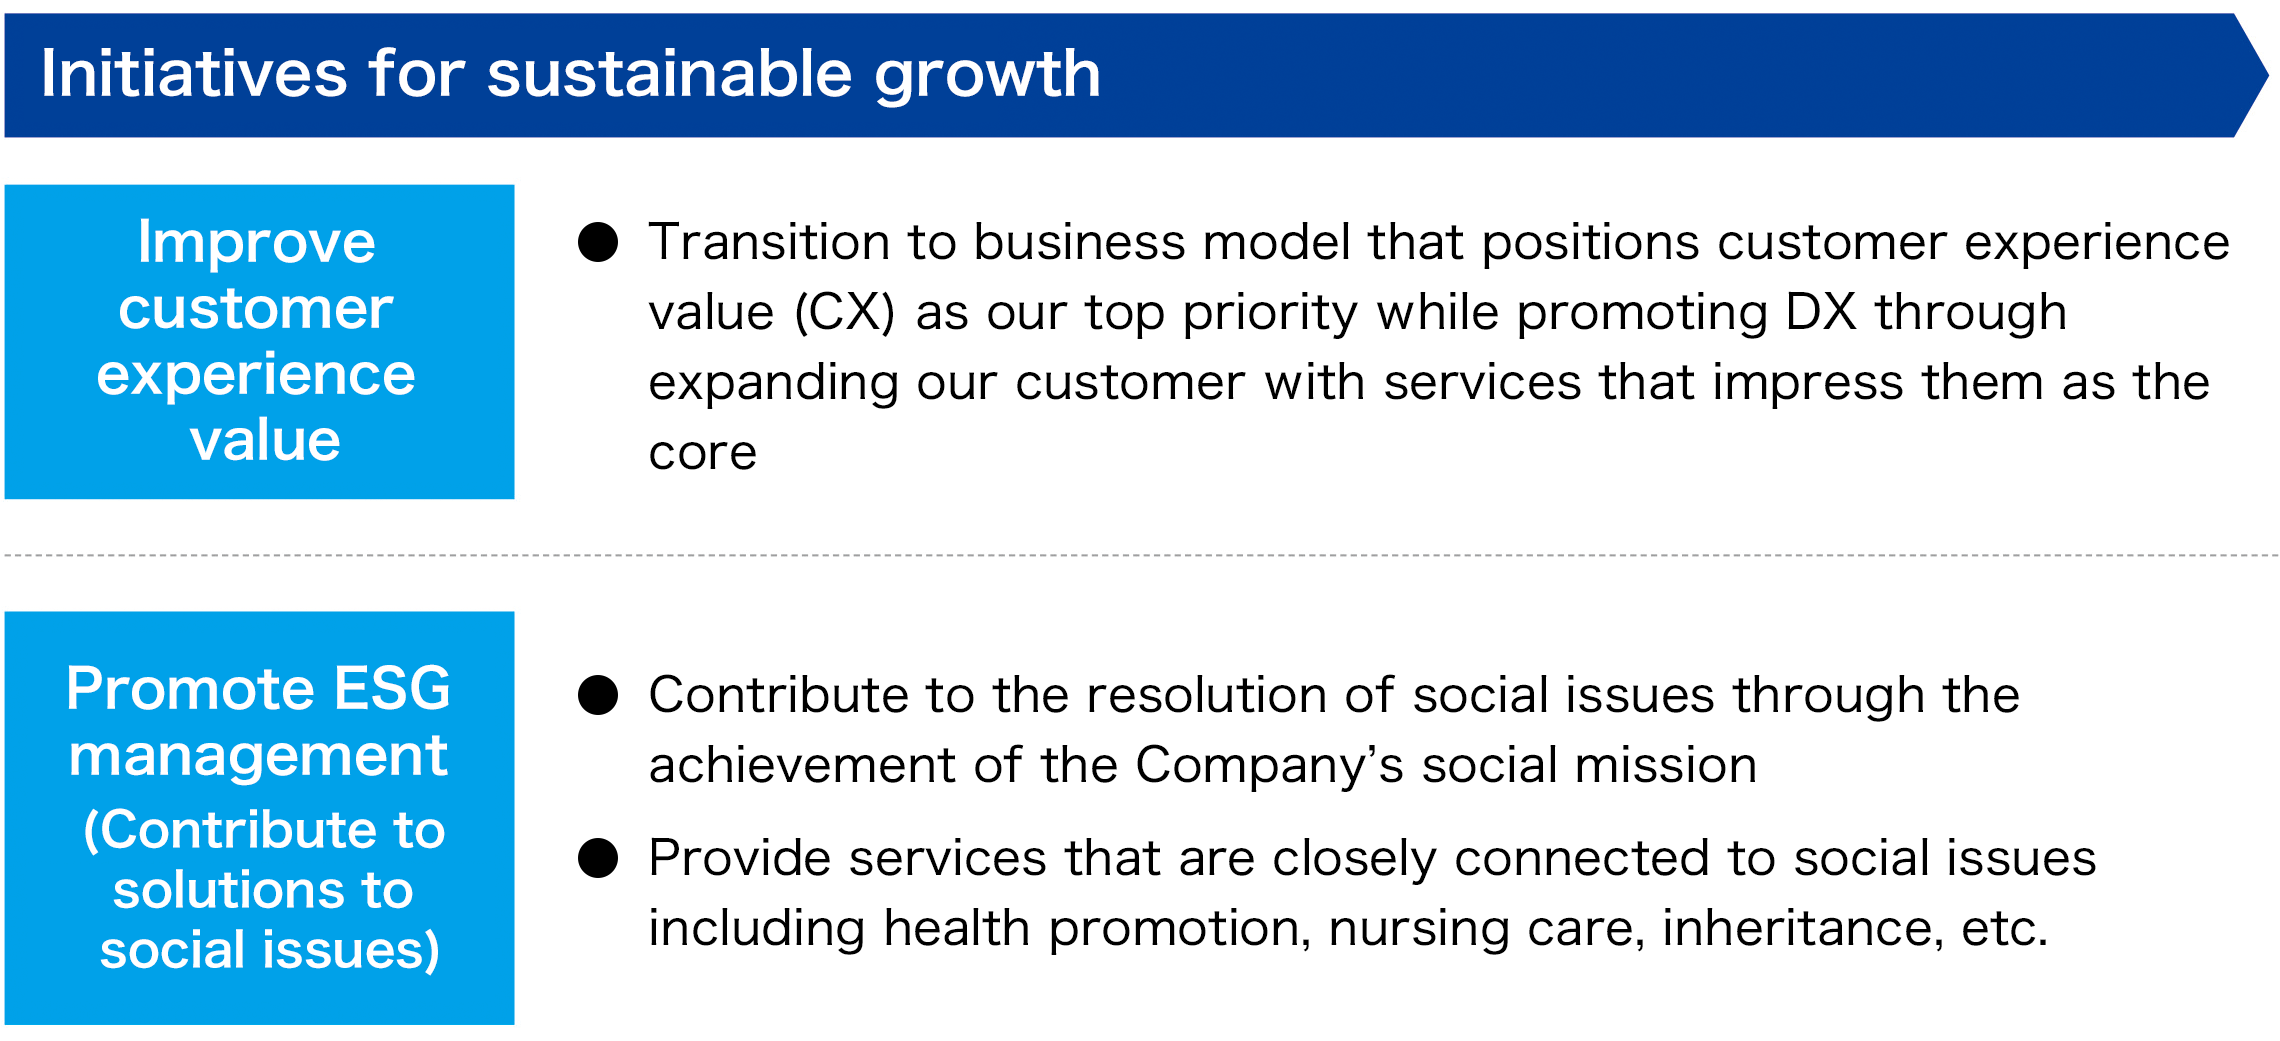 Initiatives for sustainable growth